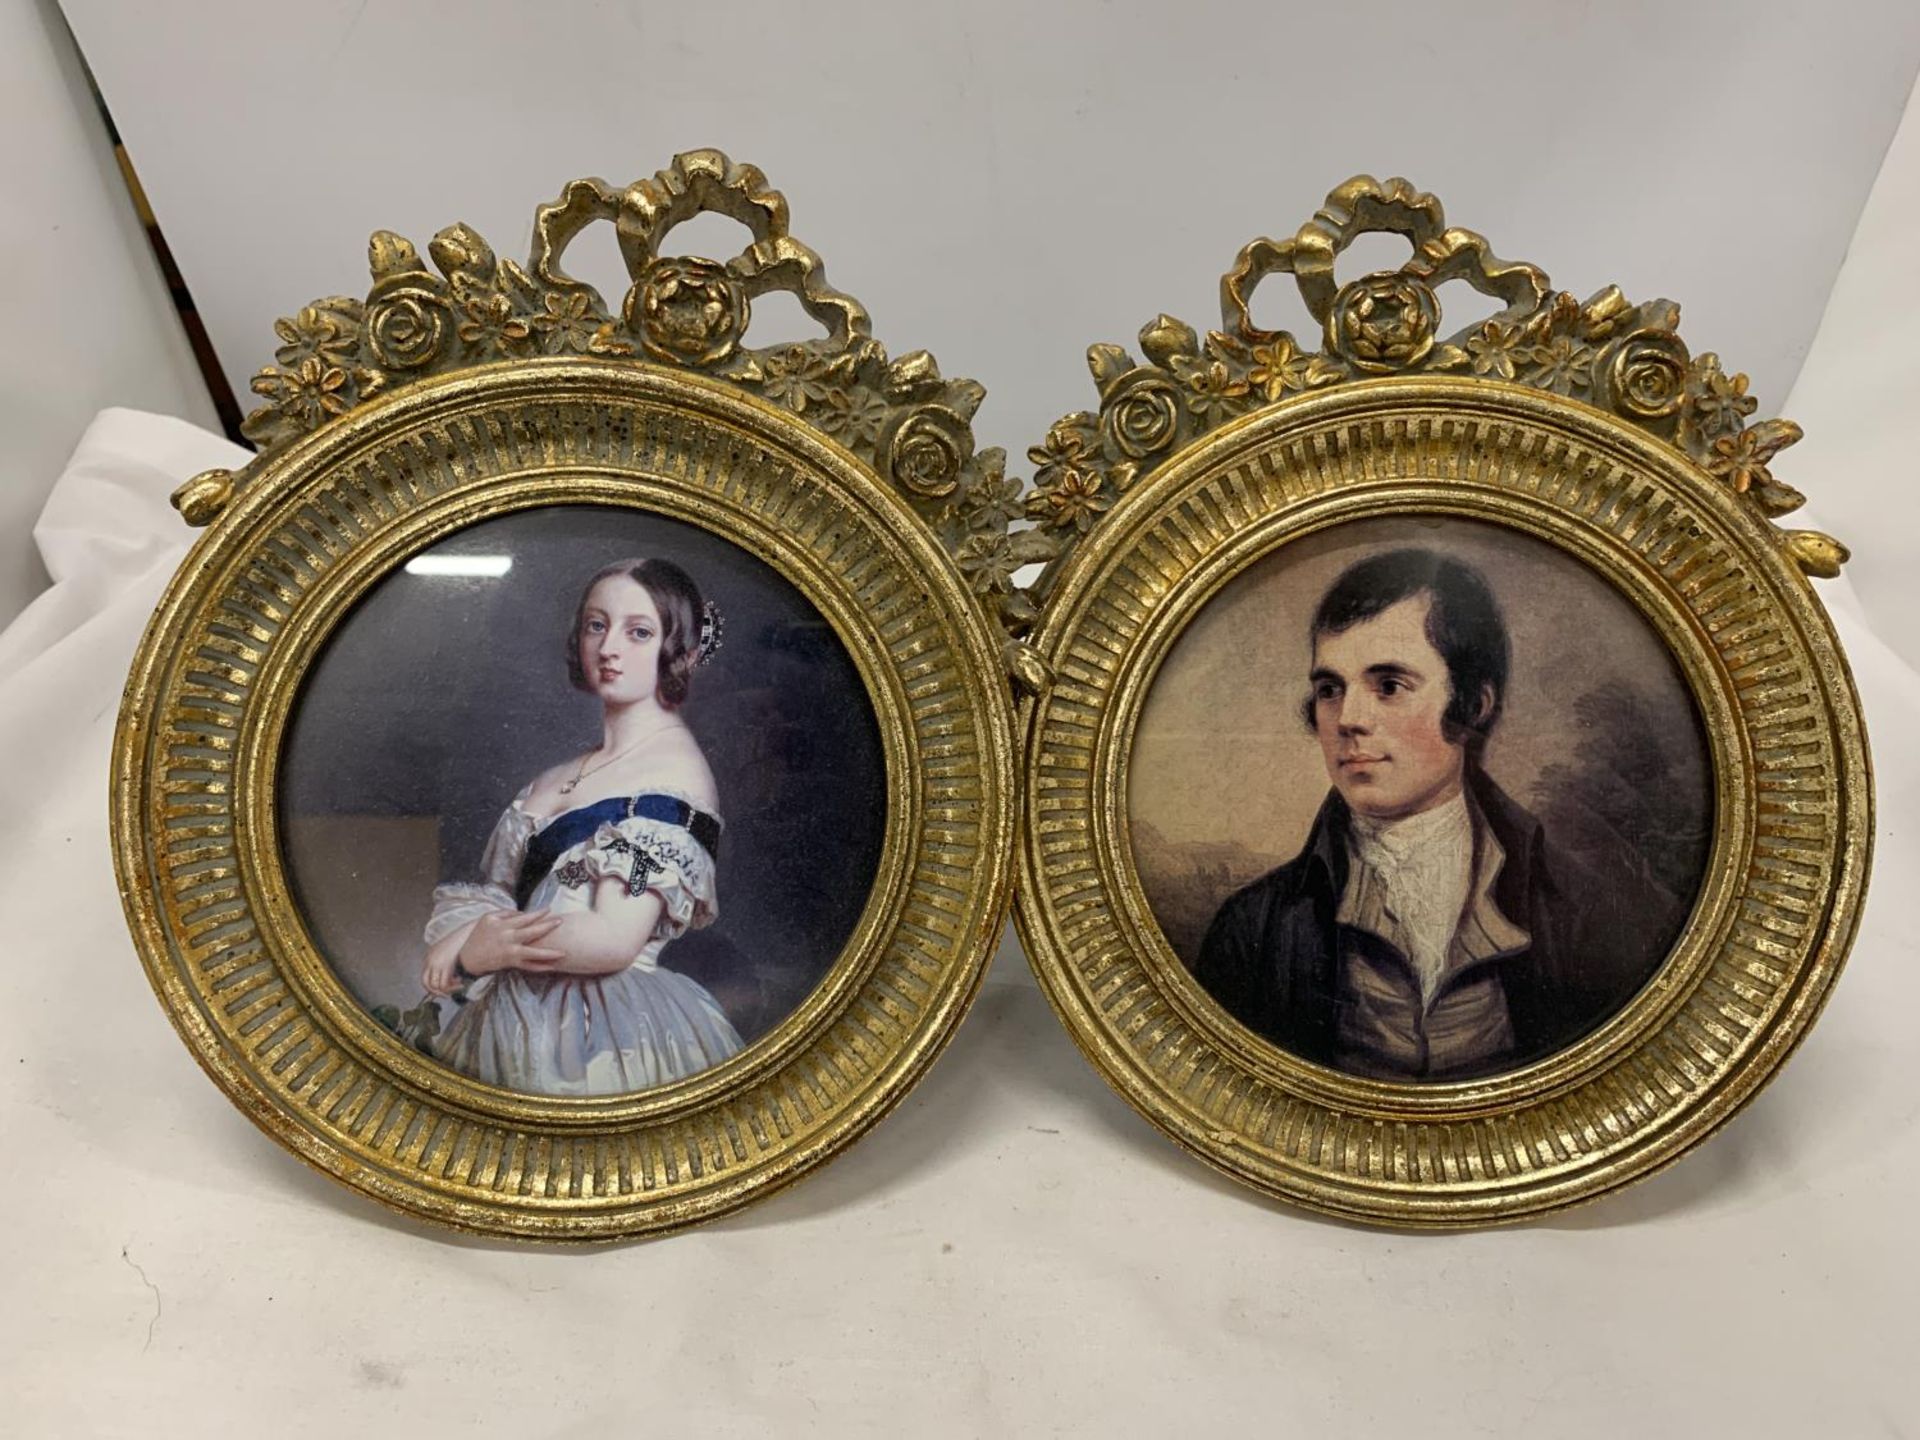 TWO ROUND GILT FRAMED PORTRAIT PRINTS OF A MAN AND A LADY, HEIGHT 24CM - Image 2 of 2